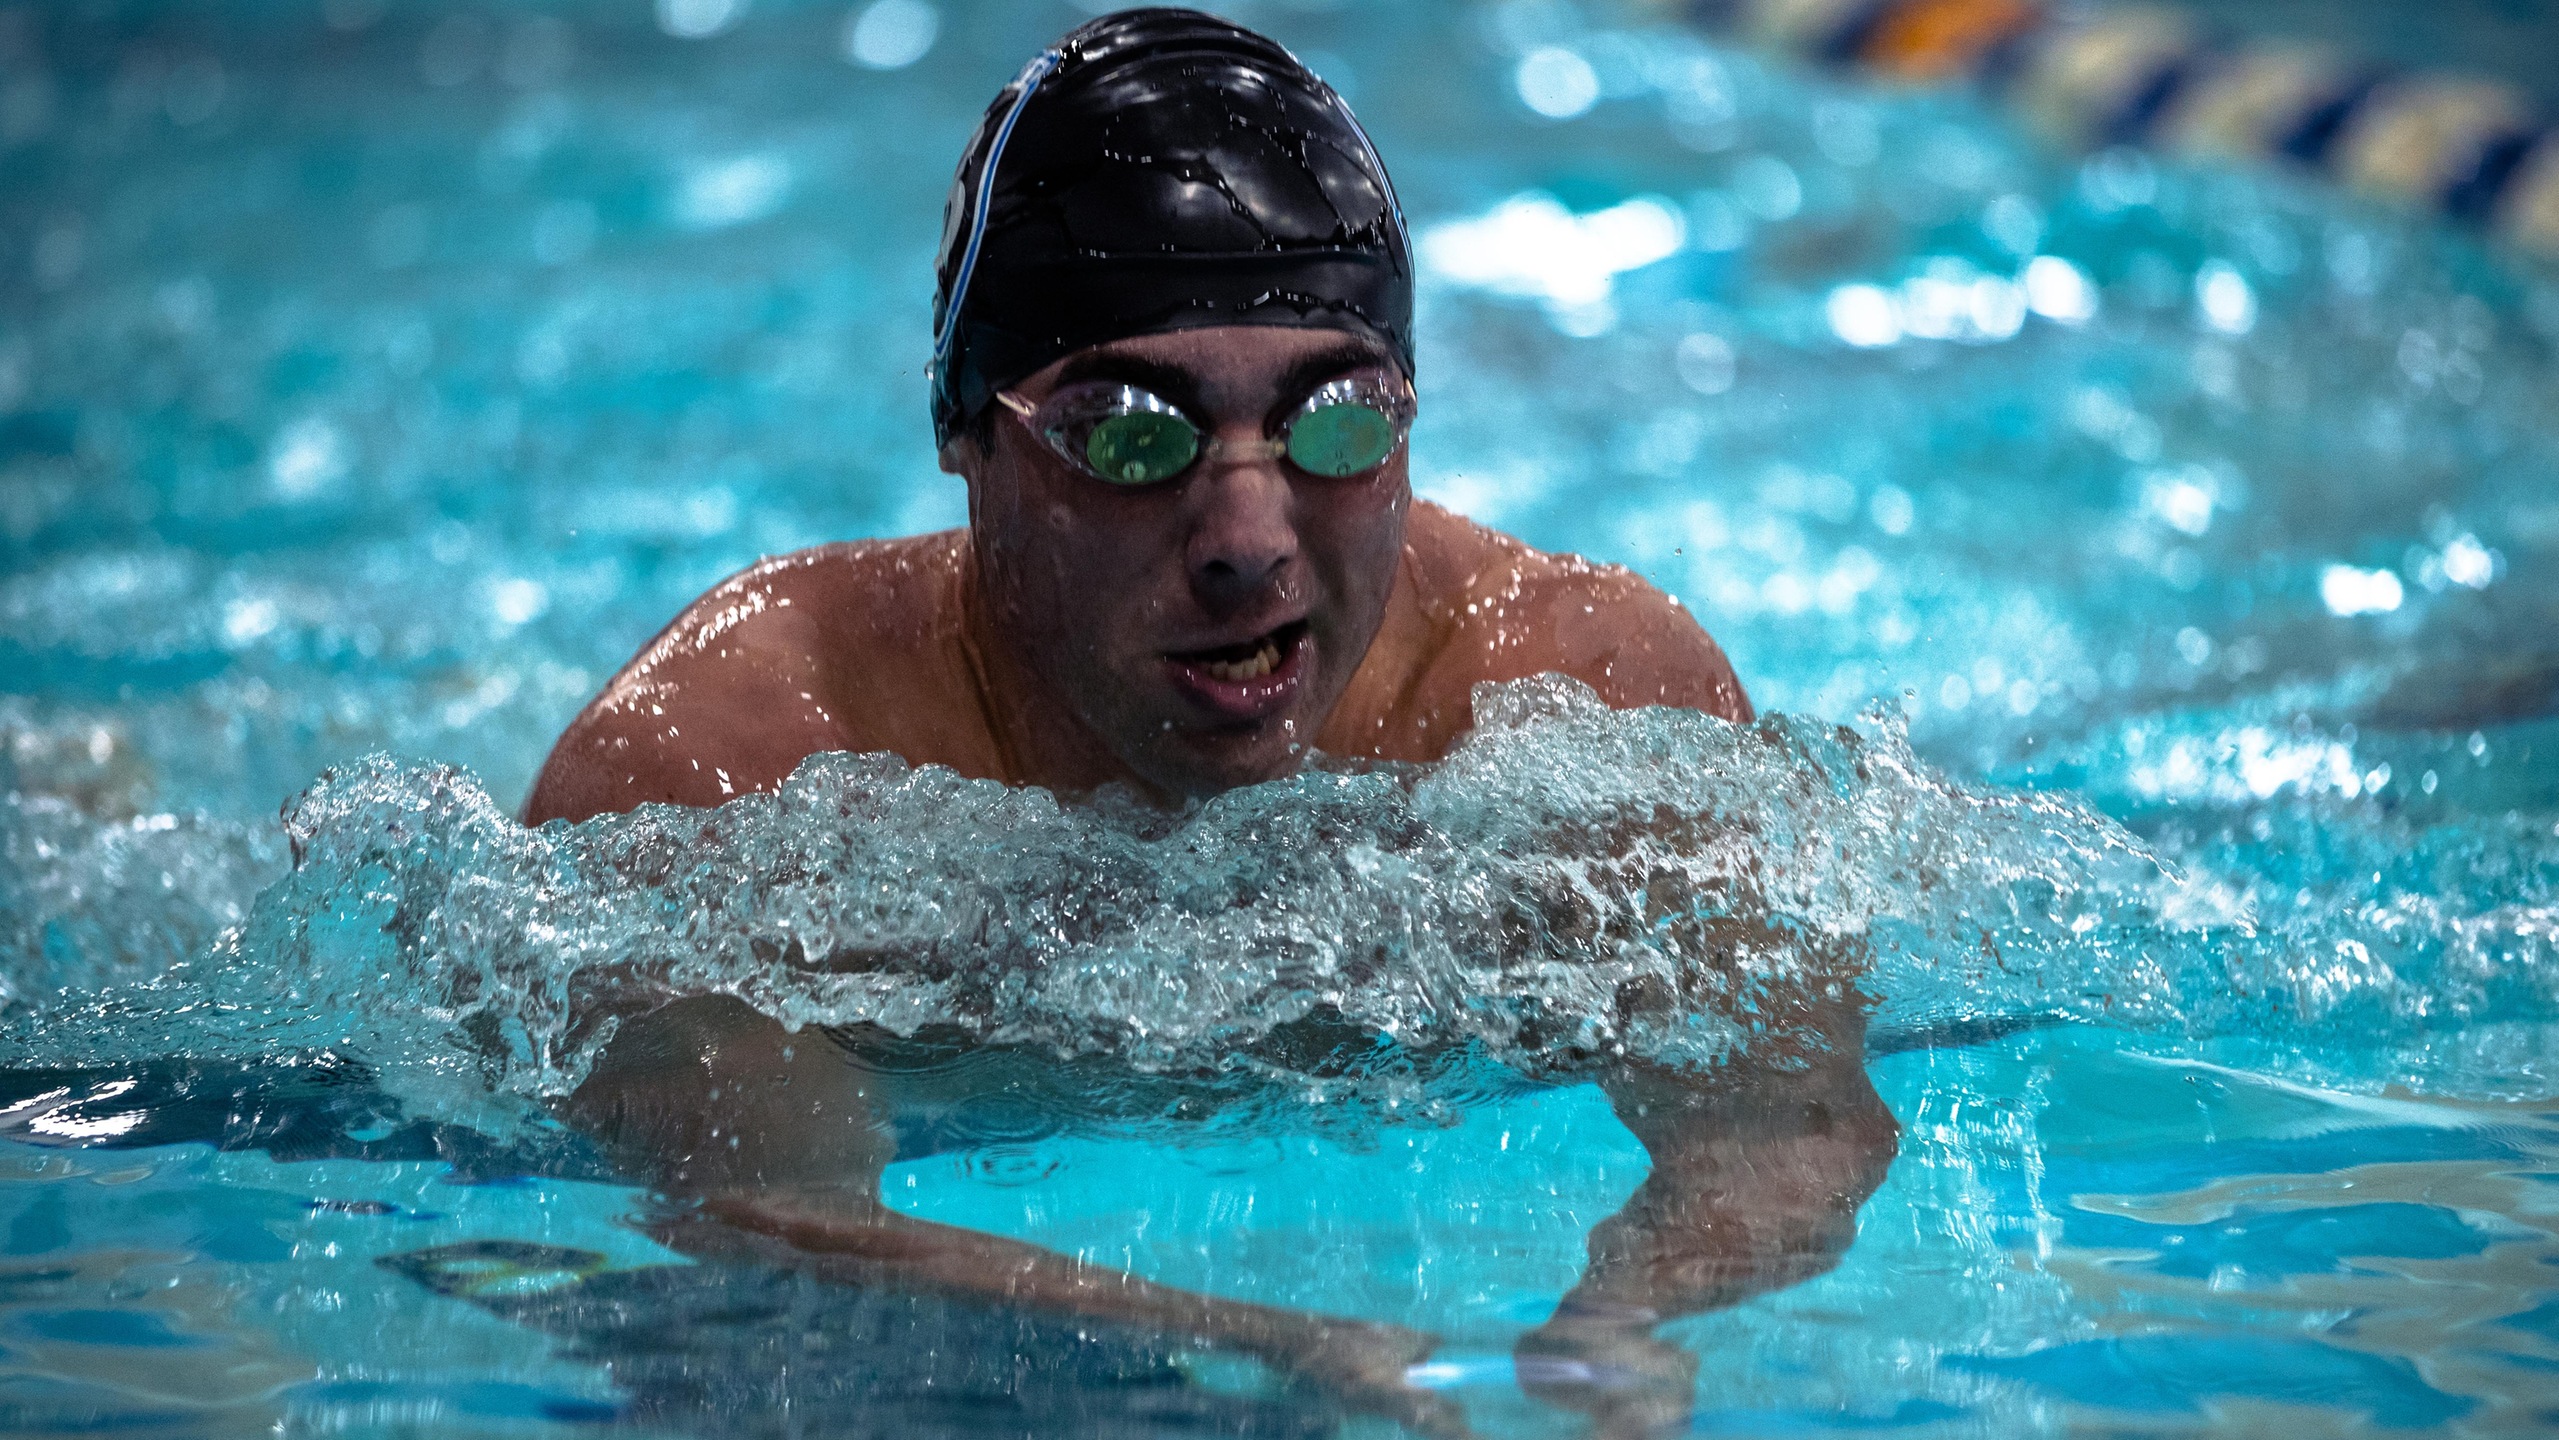 Swimming & Diving Set for Two Home Meets, Including Senior Day on Sunday